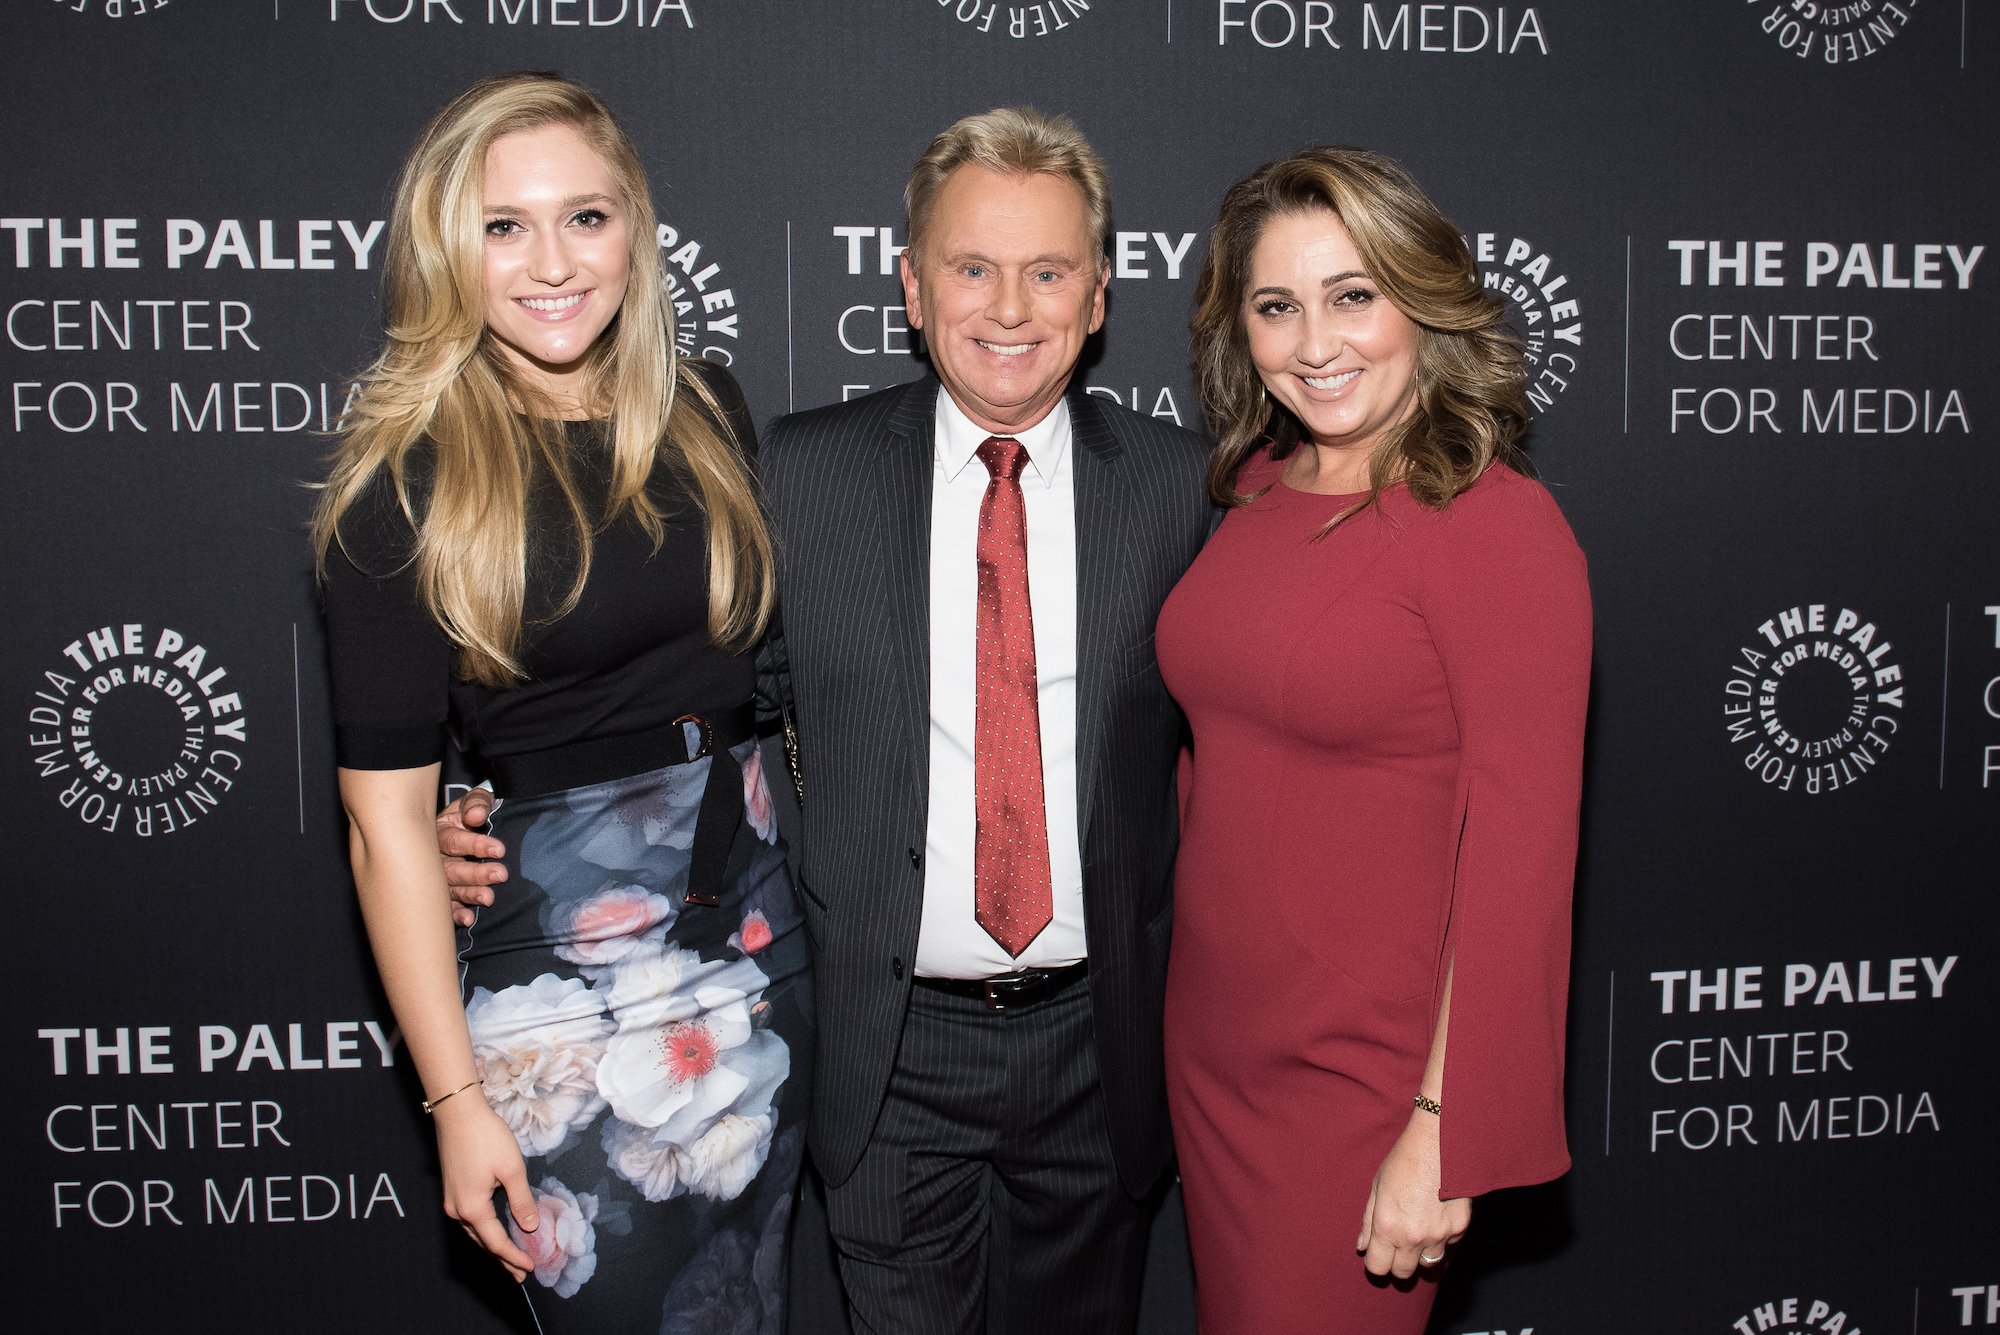 Maggie Sajak, Pat Sajak, and Lesly Brown attend The Paley Center For Media Presents: Wheel Of Fortune: 35 Years As America's Game